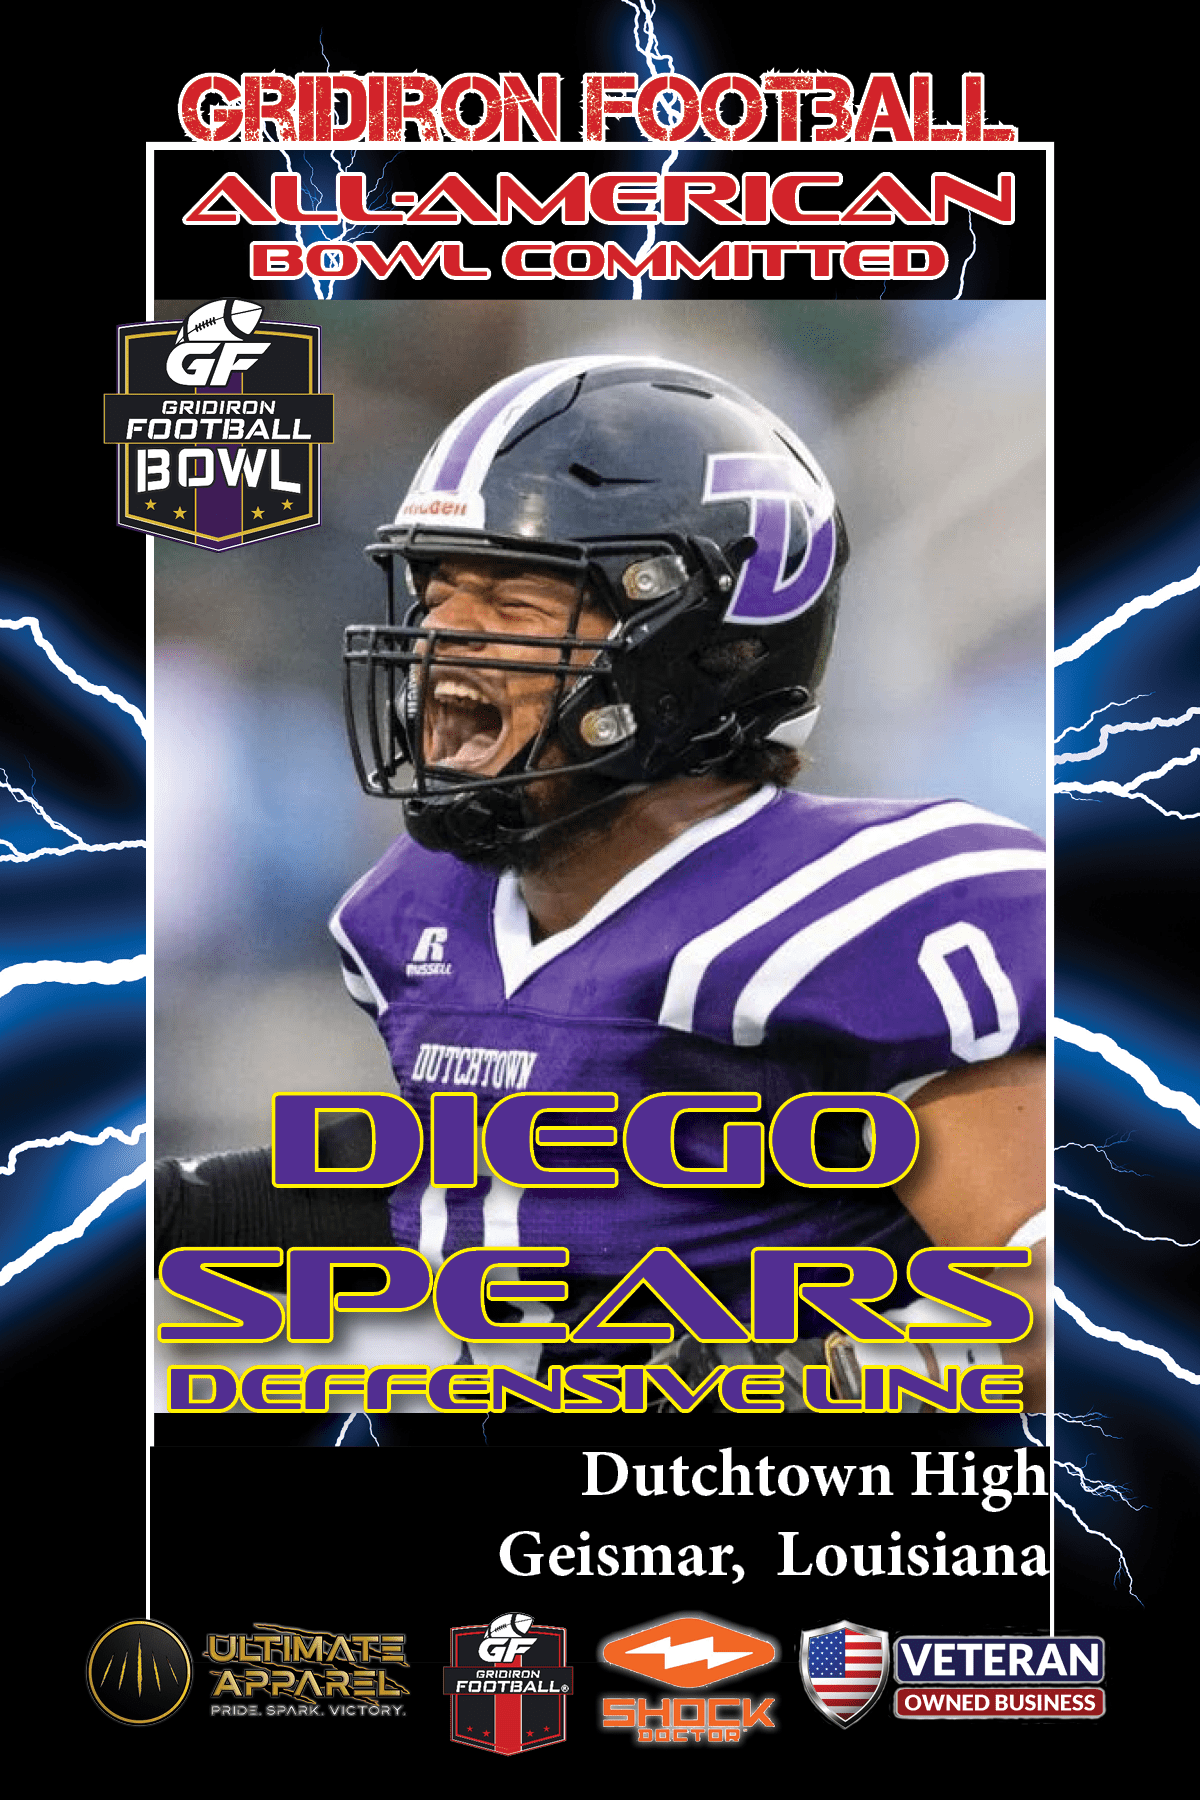 BREAKING NEWS: Dutchtown High School (Geismar, LA) DT Diego Spears Commits To The Gridiron Football All-American Bowl Game